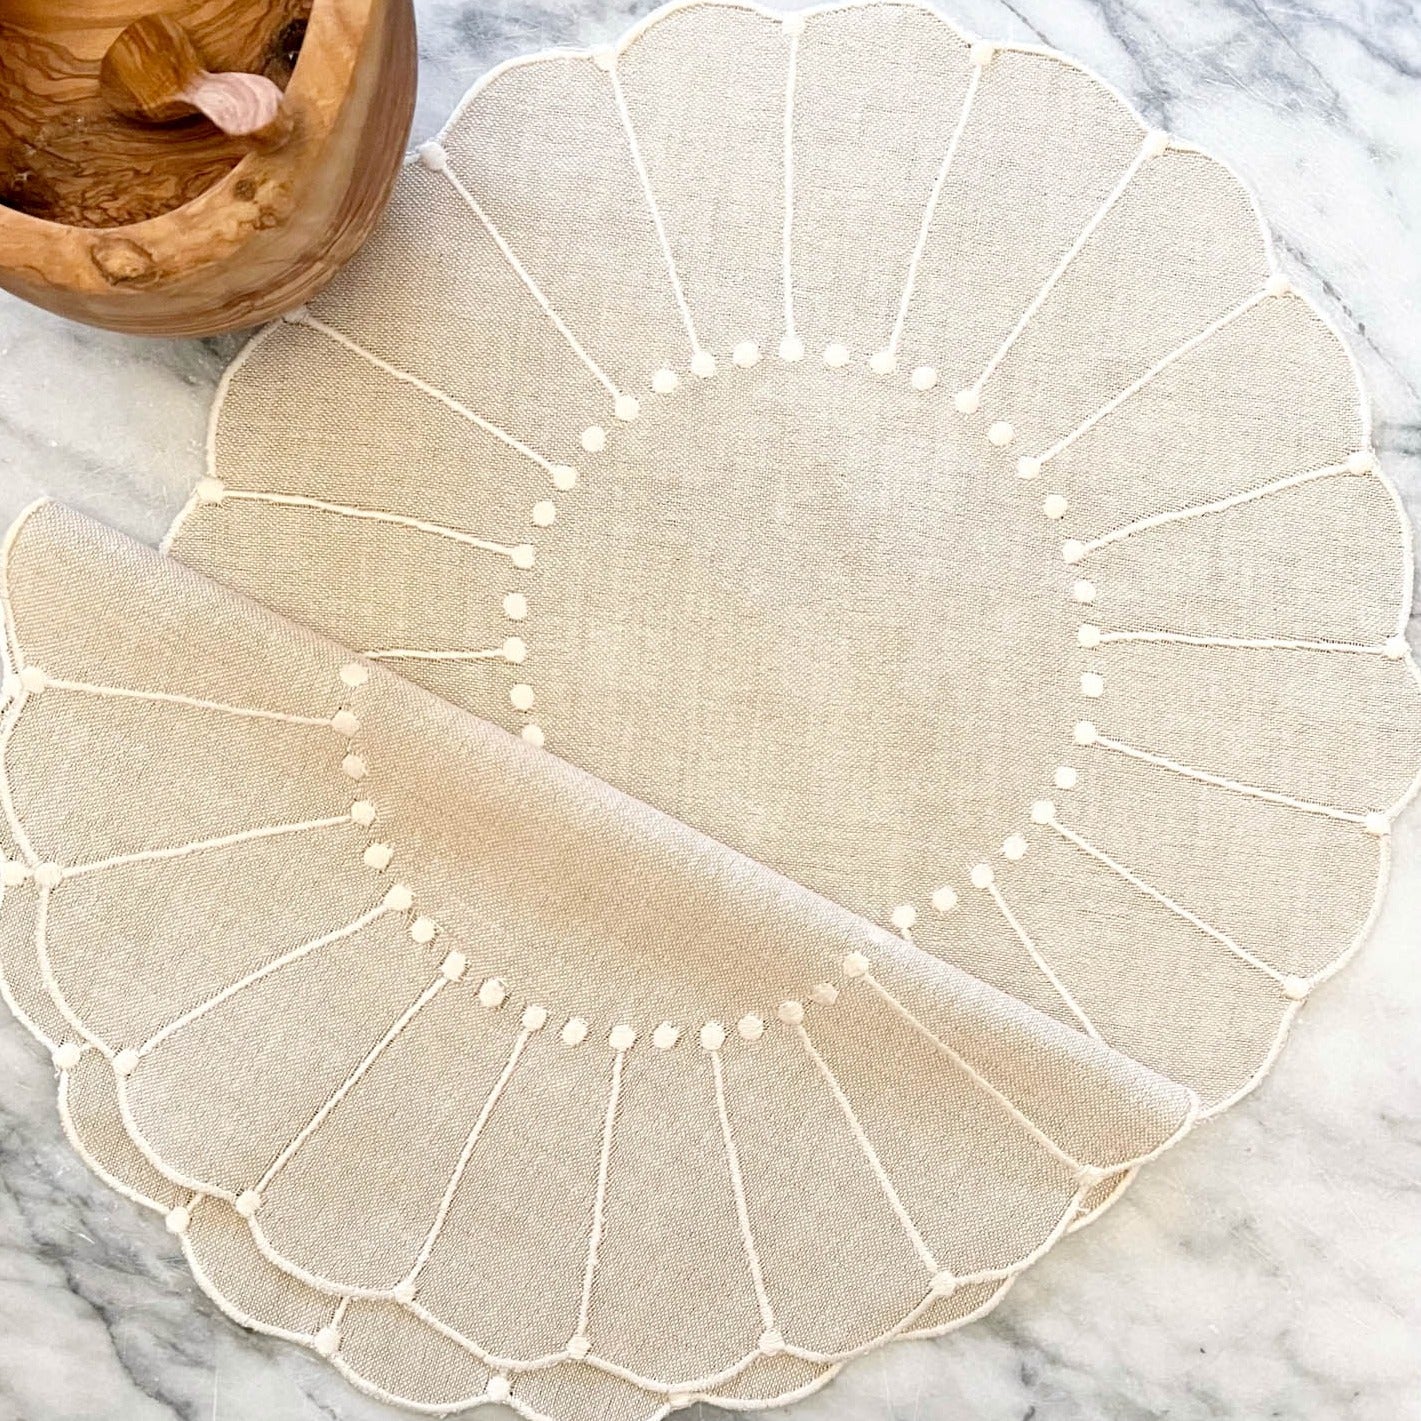 Linen Scalloped Placemats - Tan (Set of 6)